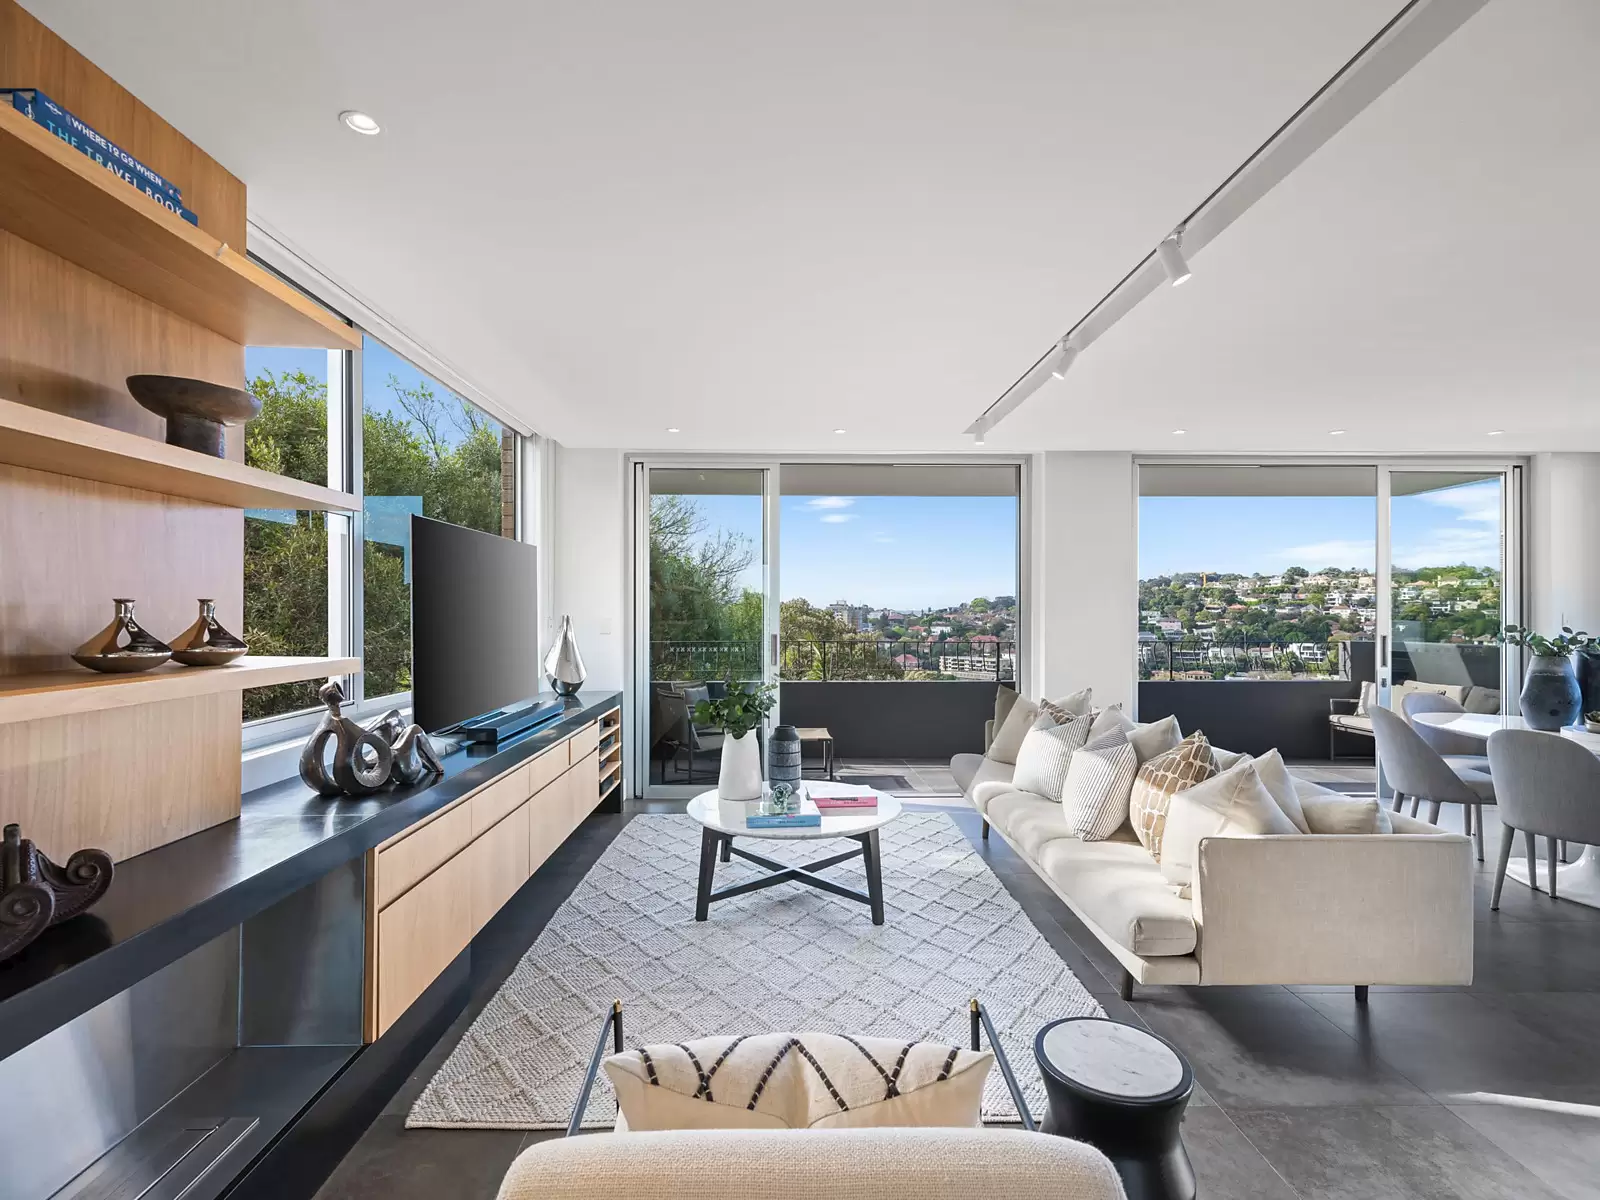 Photo #2: 13/321 Edgecliff Road, Woollahra - Sold by Sydney Sotheby's International Realty